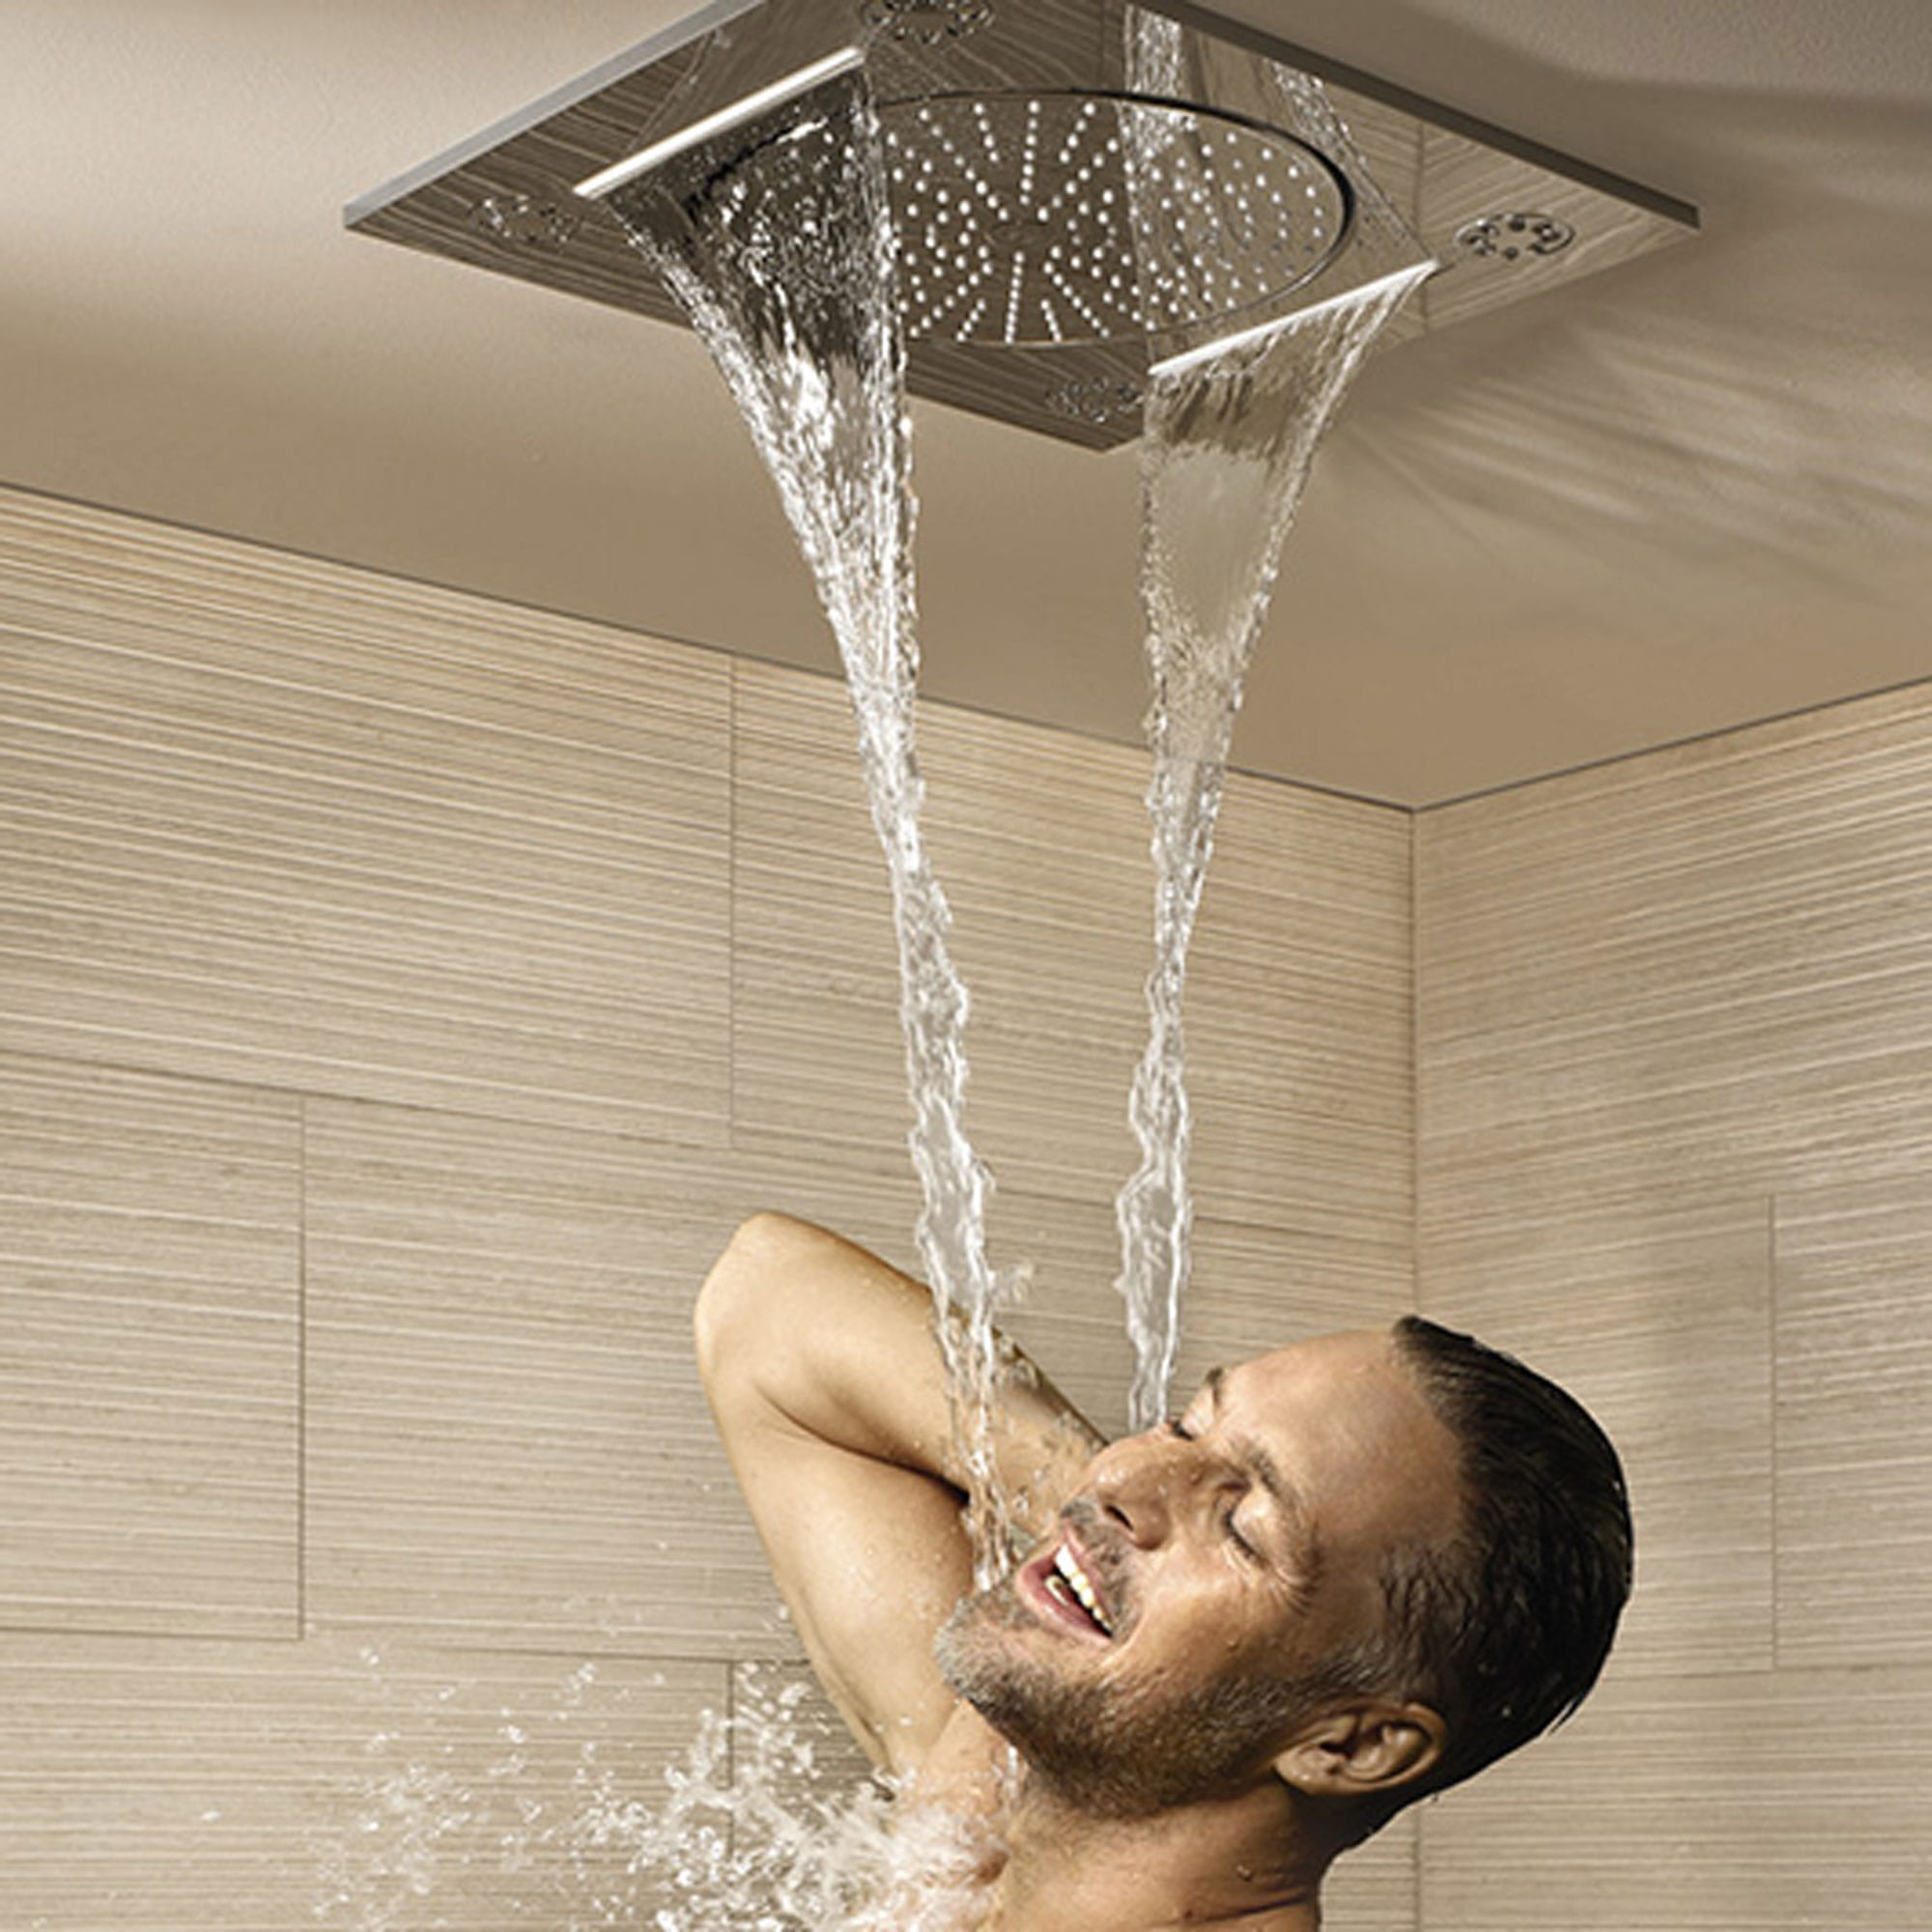 Grohe rainshower with water running onto person